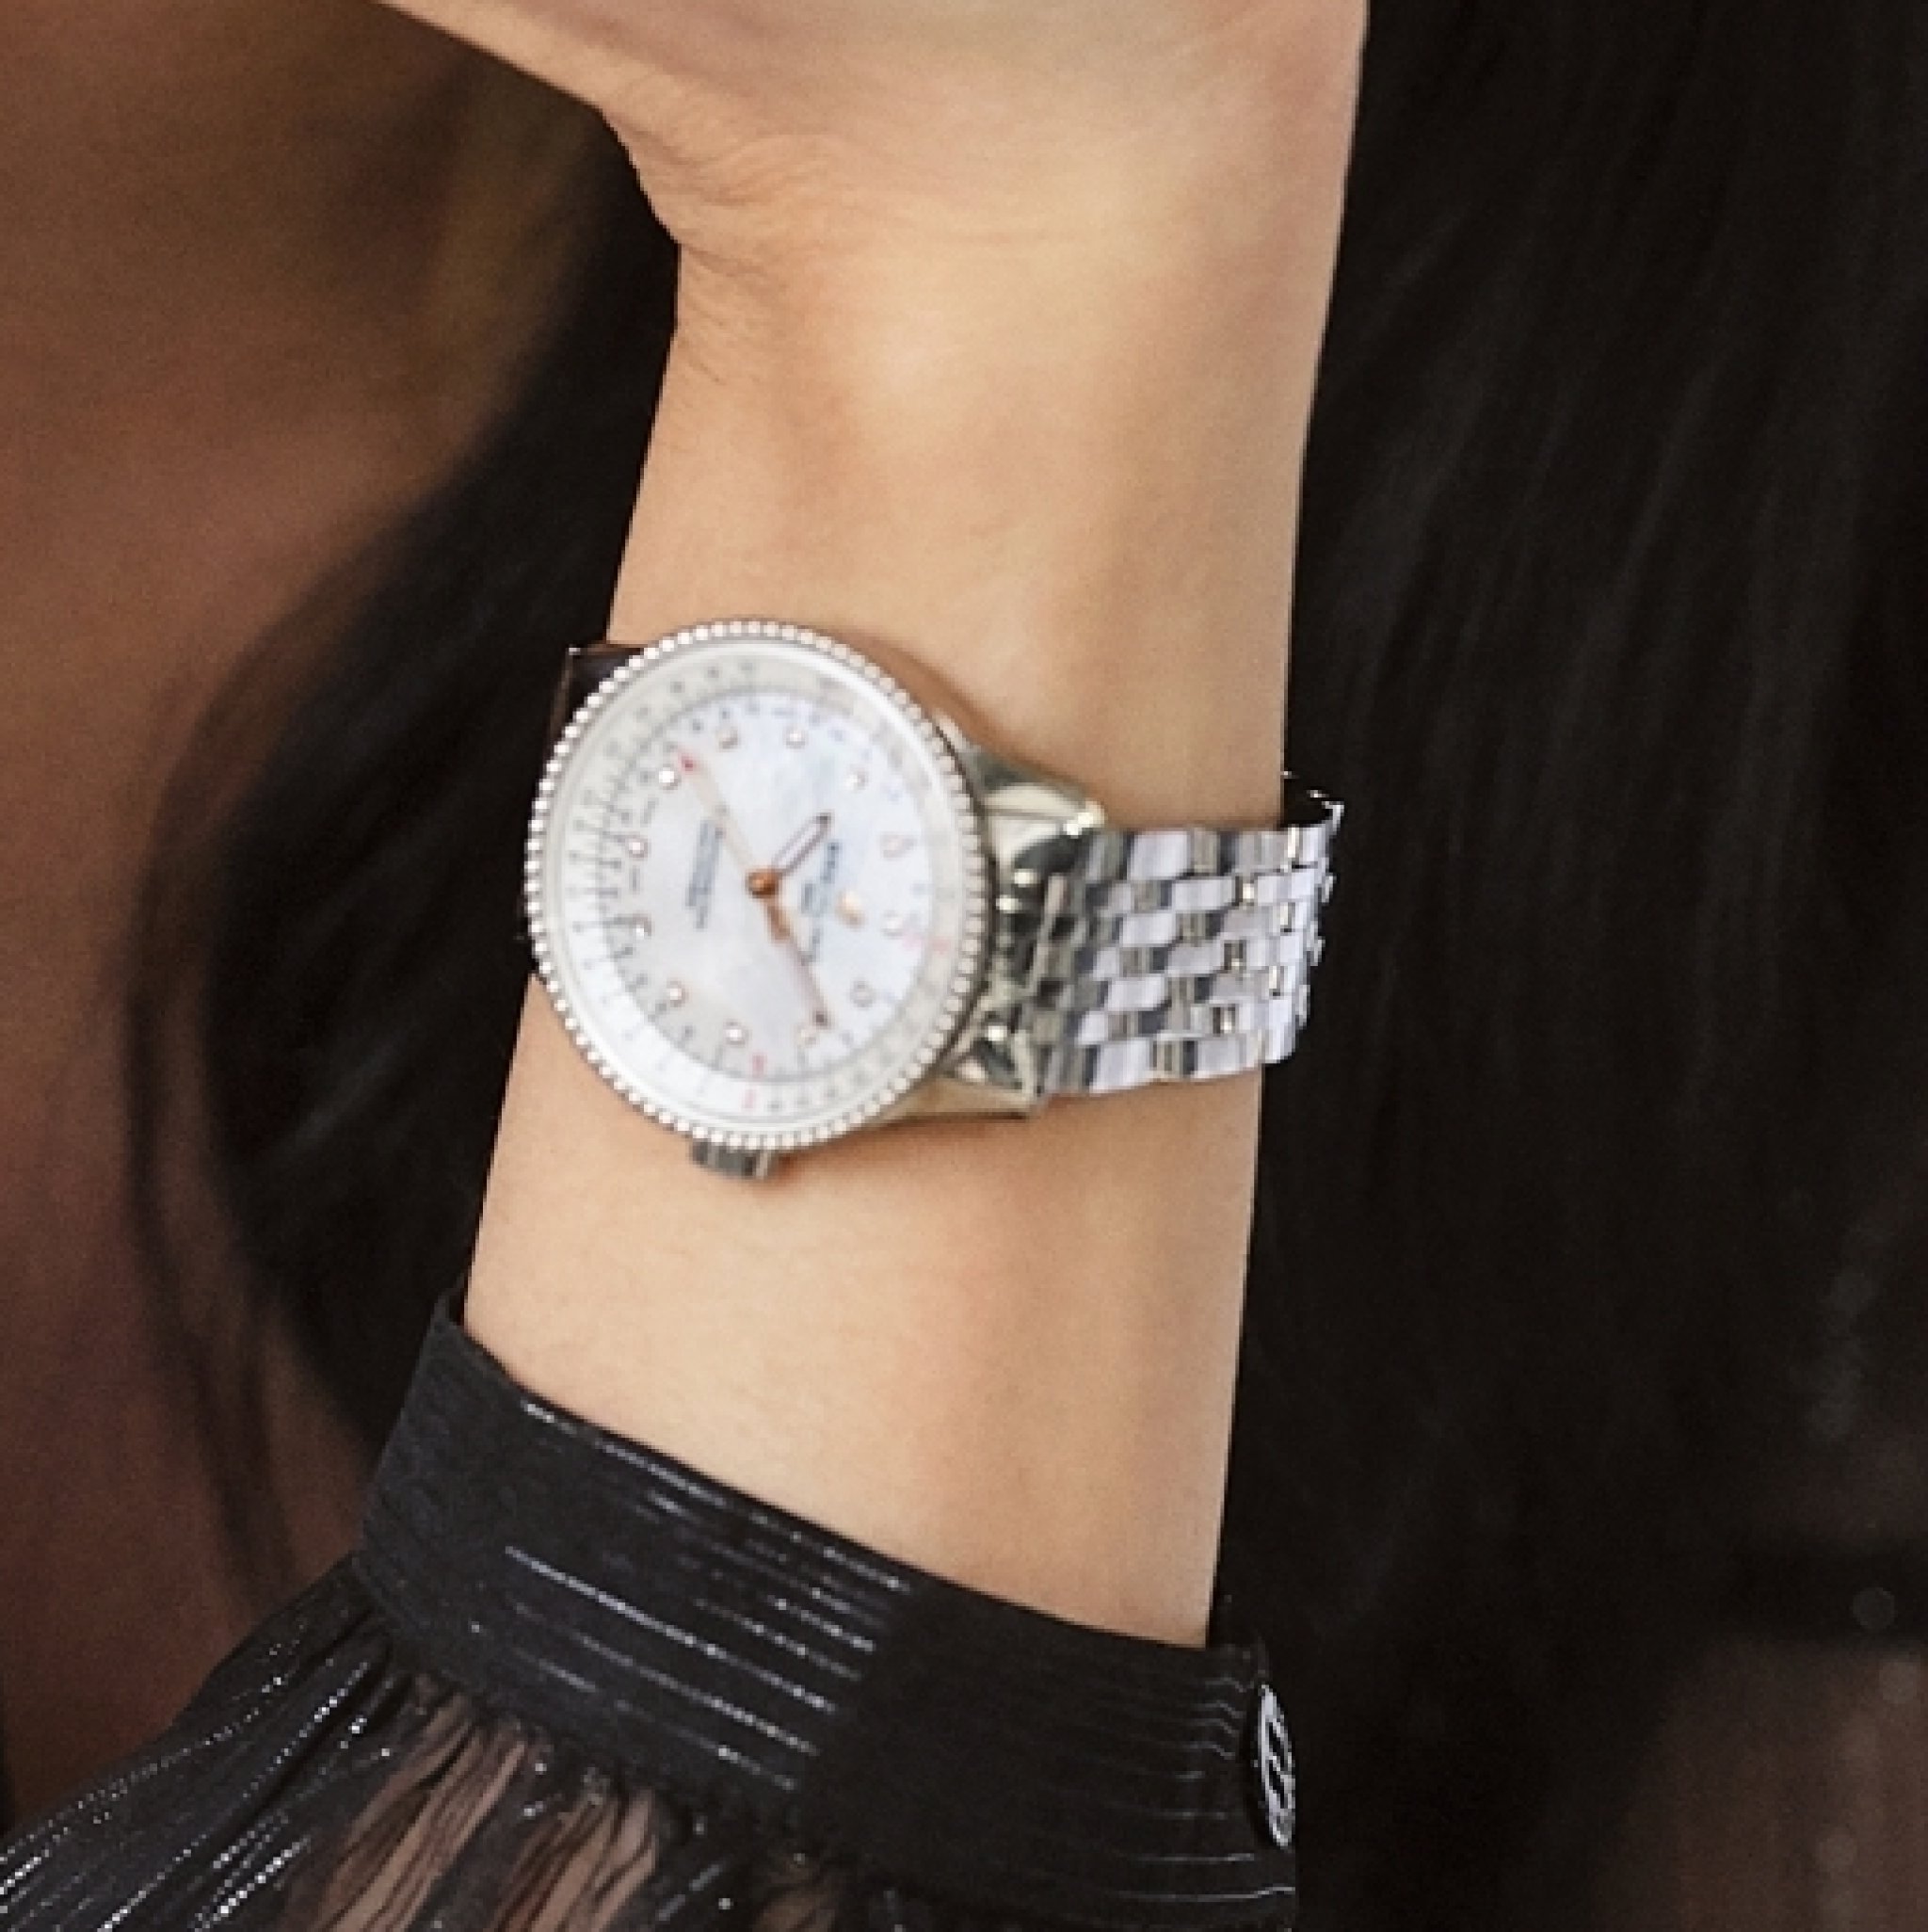 Women Jewelry & Watches Breitling Women Watches Breitling Women Wrist Watches Breitling Women Wrist Watches Breitling Women Wrist Watch BREITLING silver 